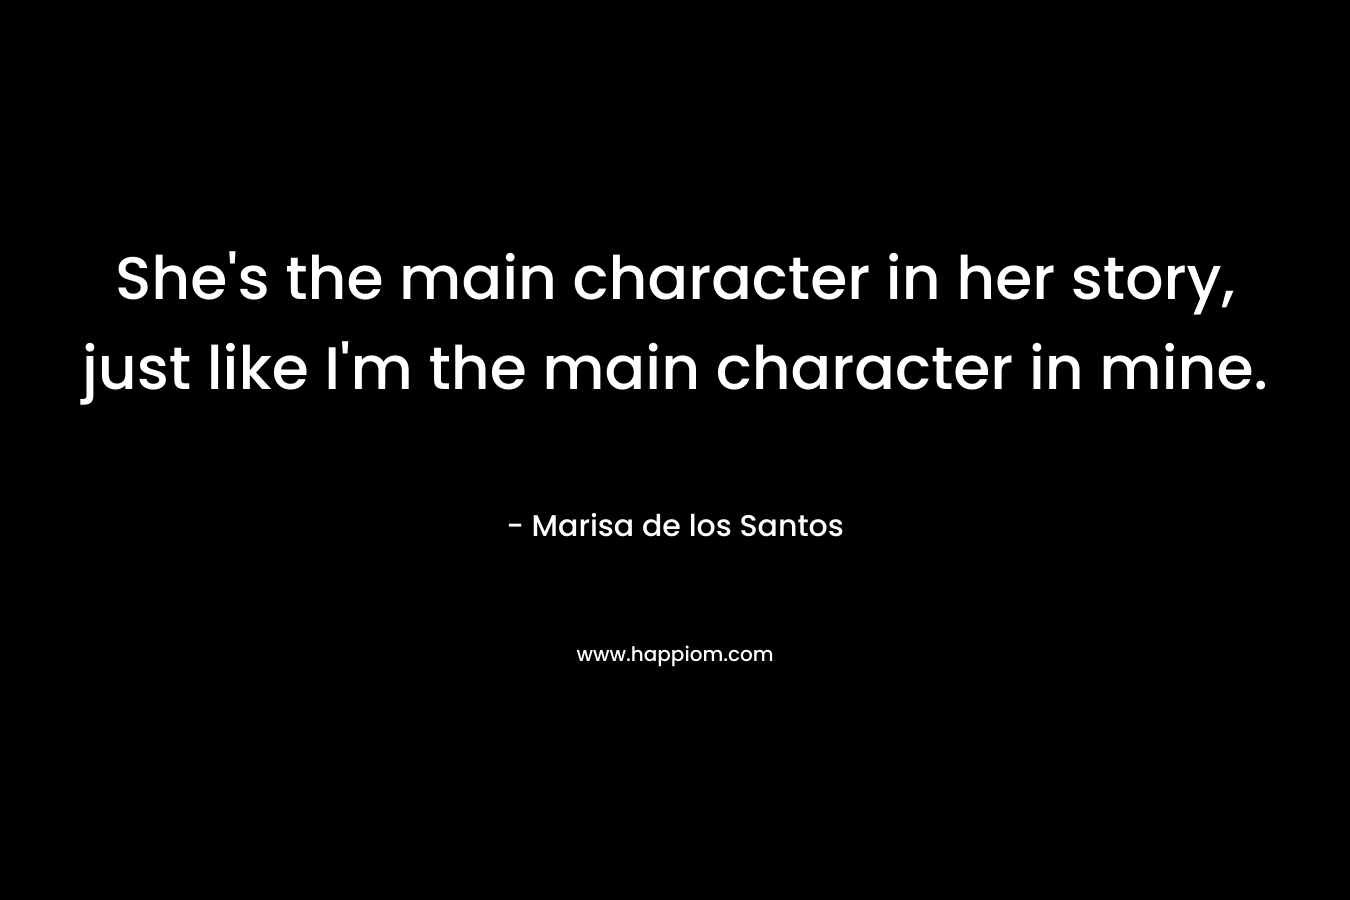 She’s the main character in her story, just like I’m the main character in mine. – Marisa de los Santos